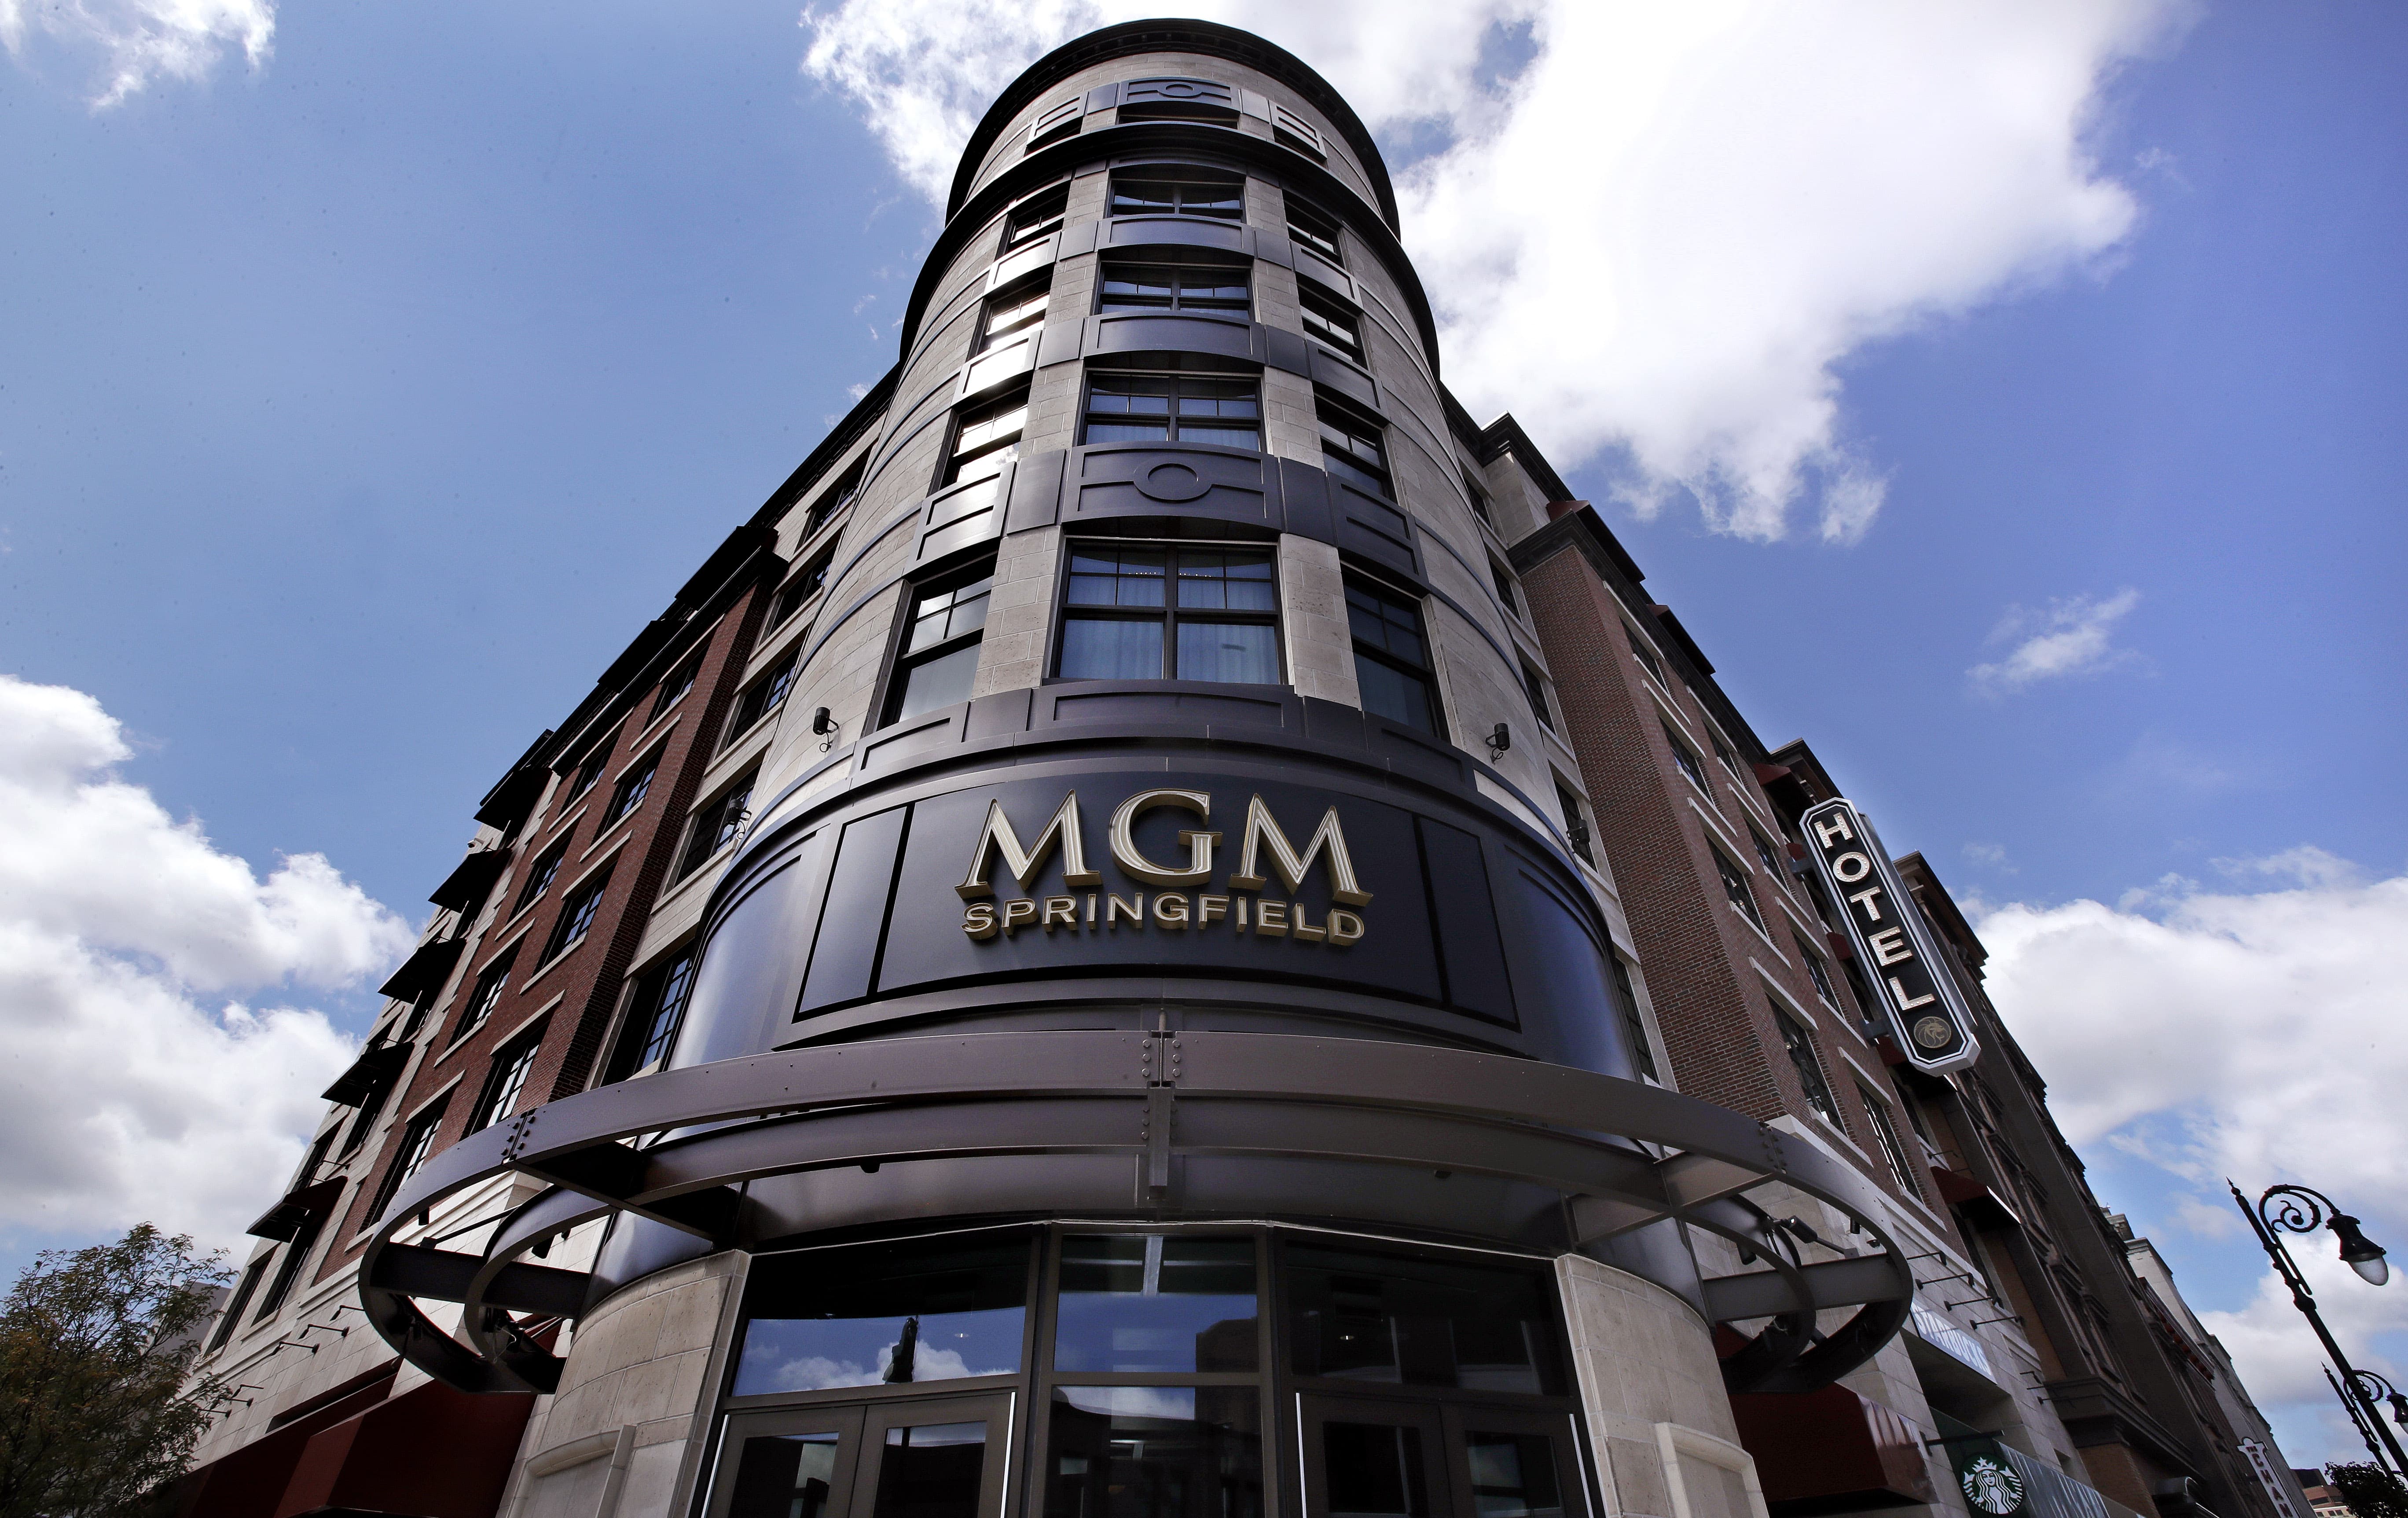 The MGM Springfield casino's front facade on Main Street in Springfield (Charles Krupa/AP)